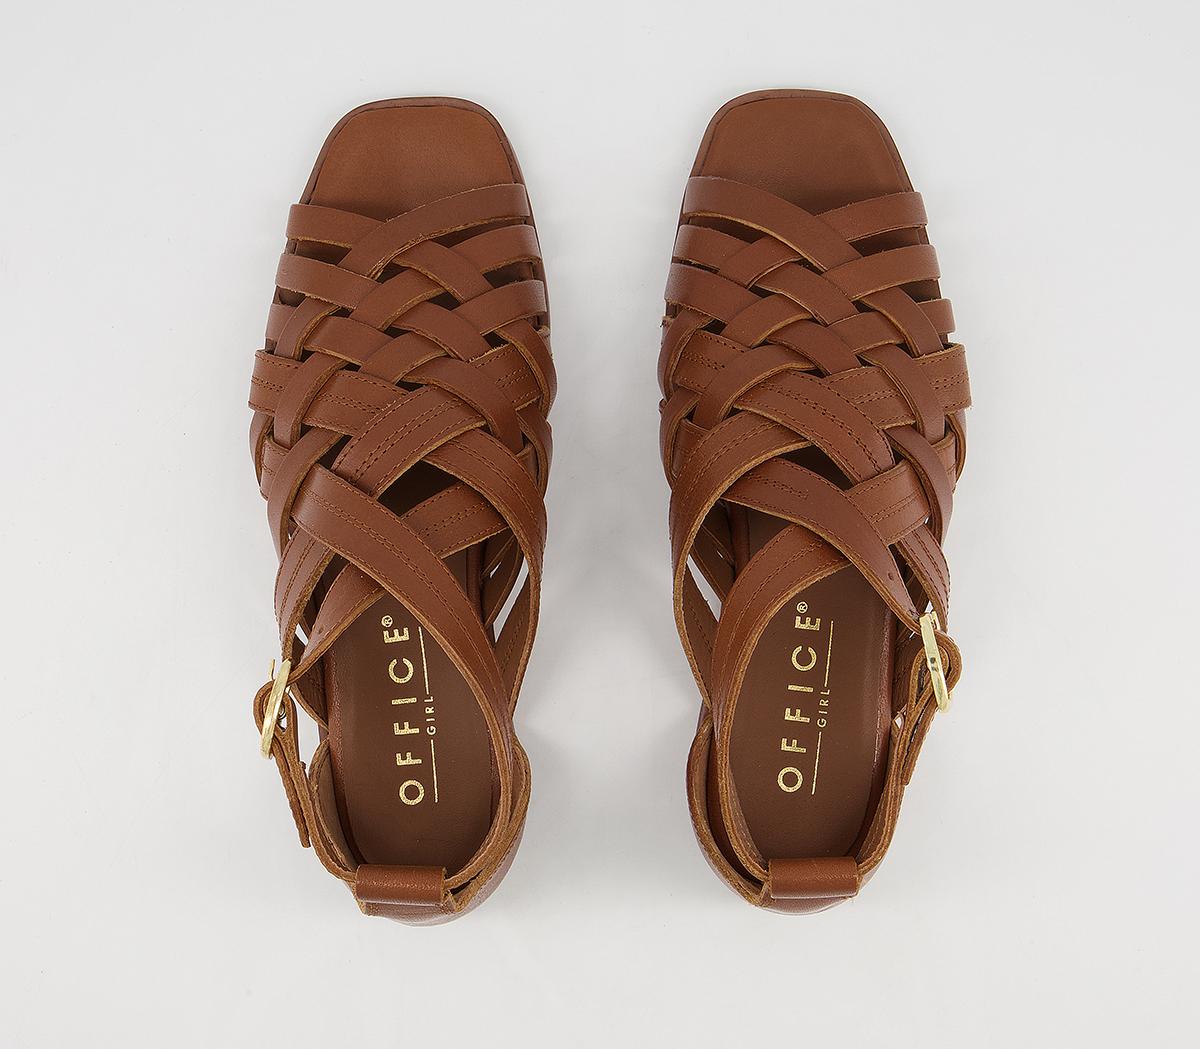 OFFICE Sabina Woven Cross Strap Sandals Tan Leather - Women’s Sandals